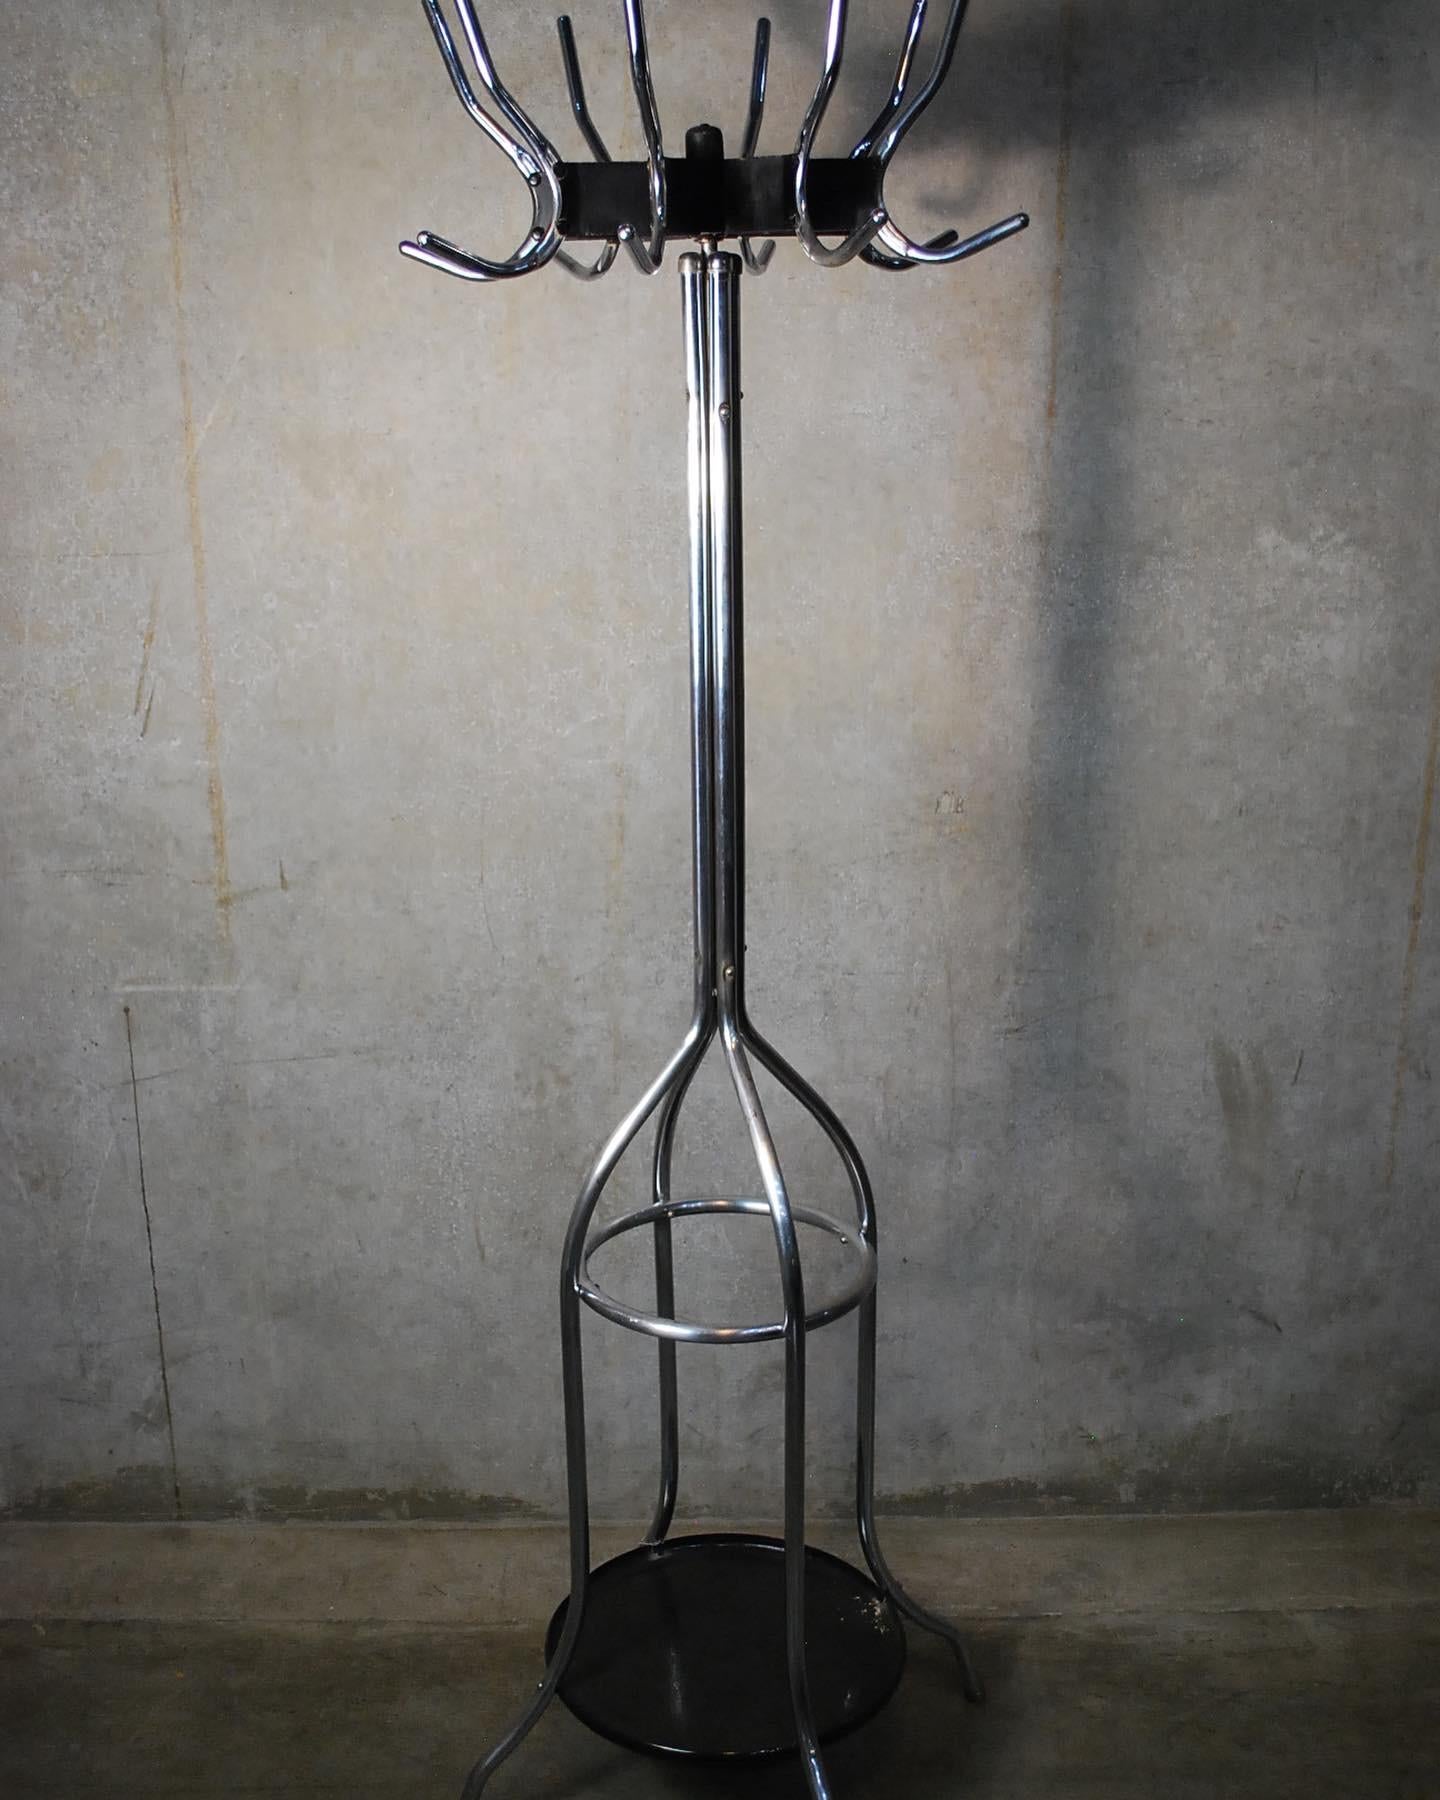 1930's vintage amercian industrial freestanding coat rack with combination umbrella stand, typically found in the barbershop or physician's office.
 Base is comprised of heavy gauge bent tubular steel legs with a riveted joint ring and concealed